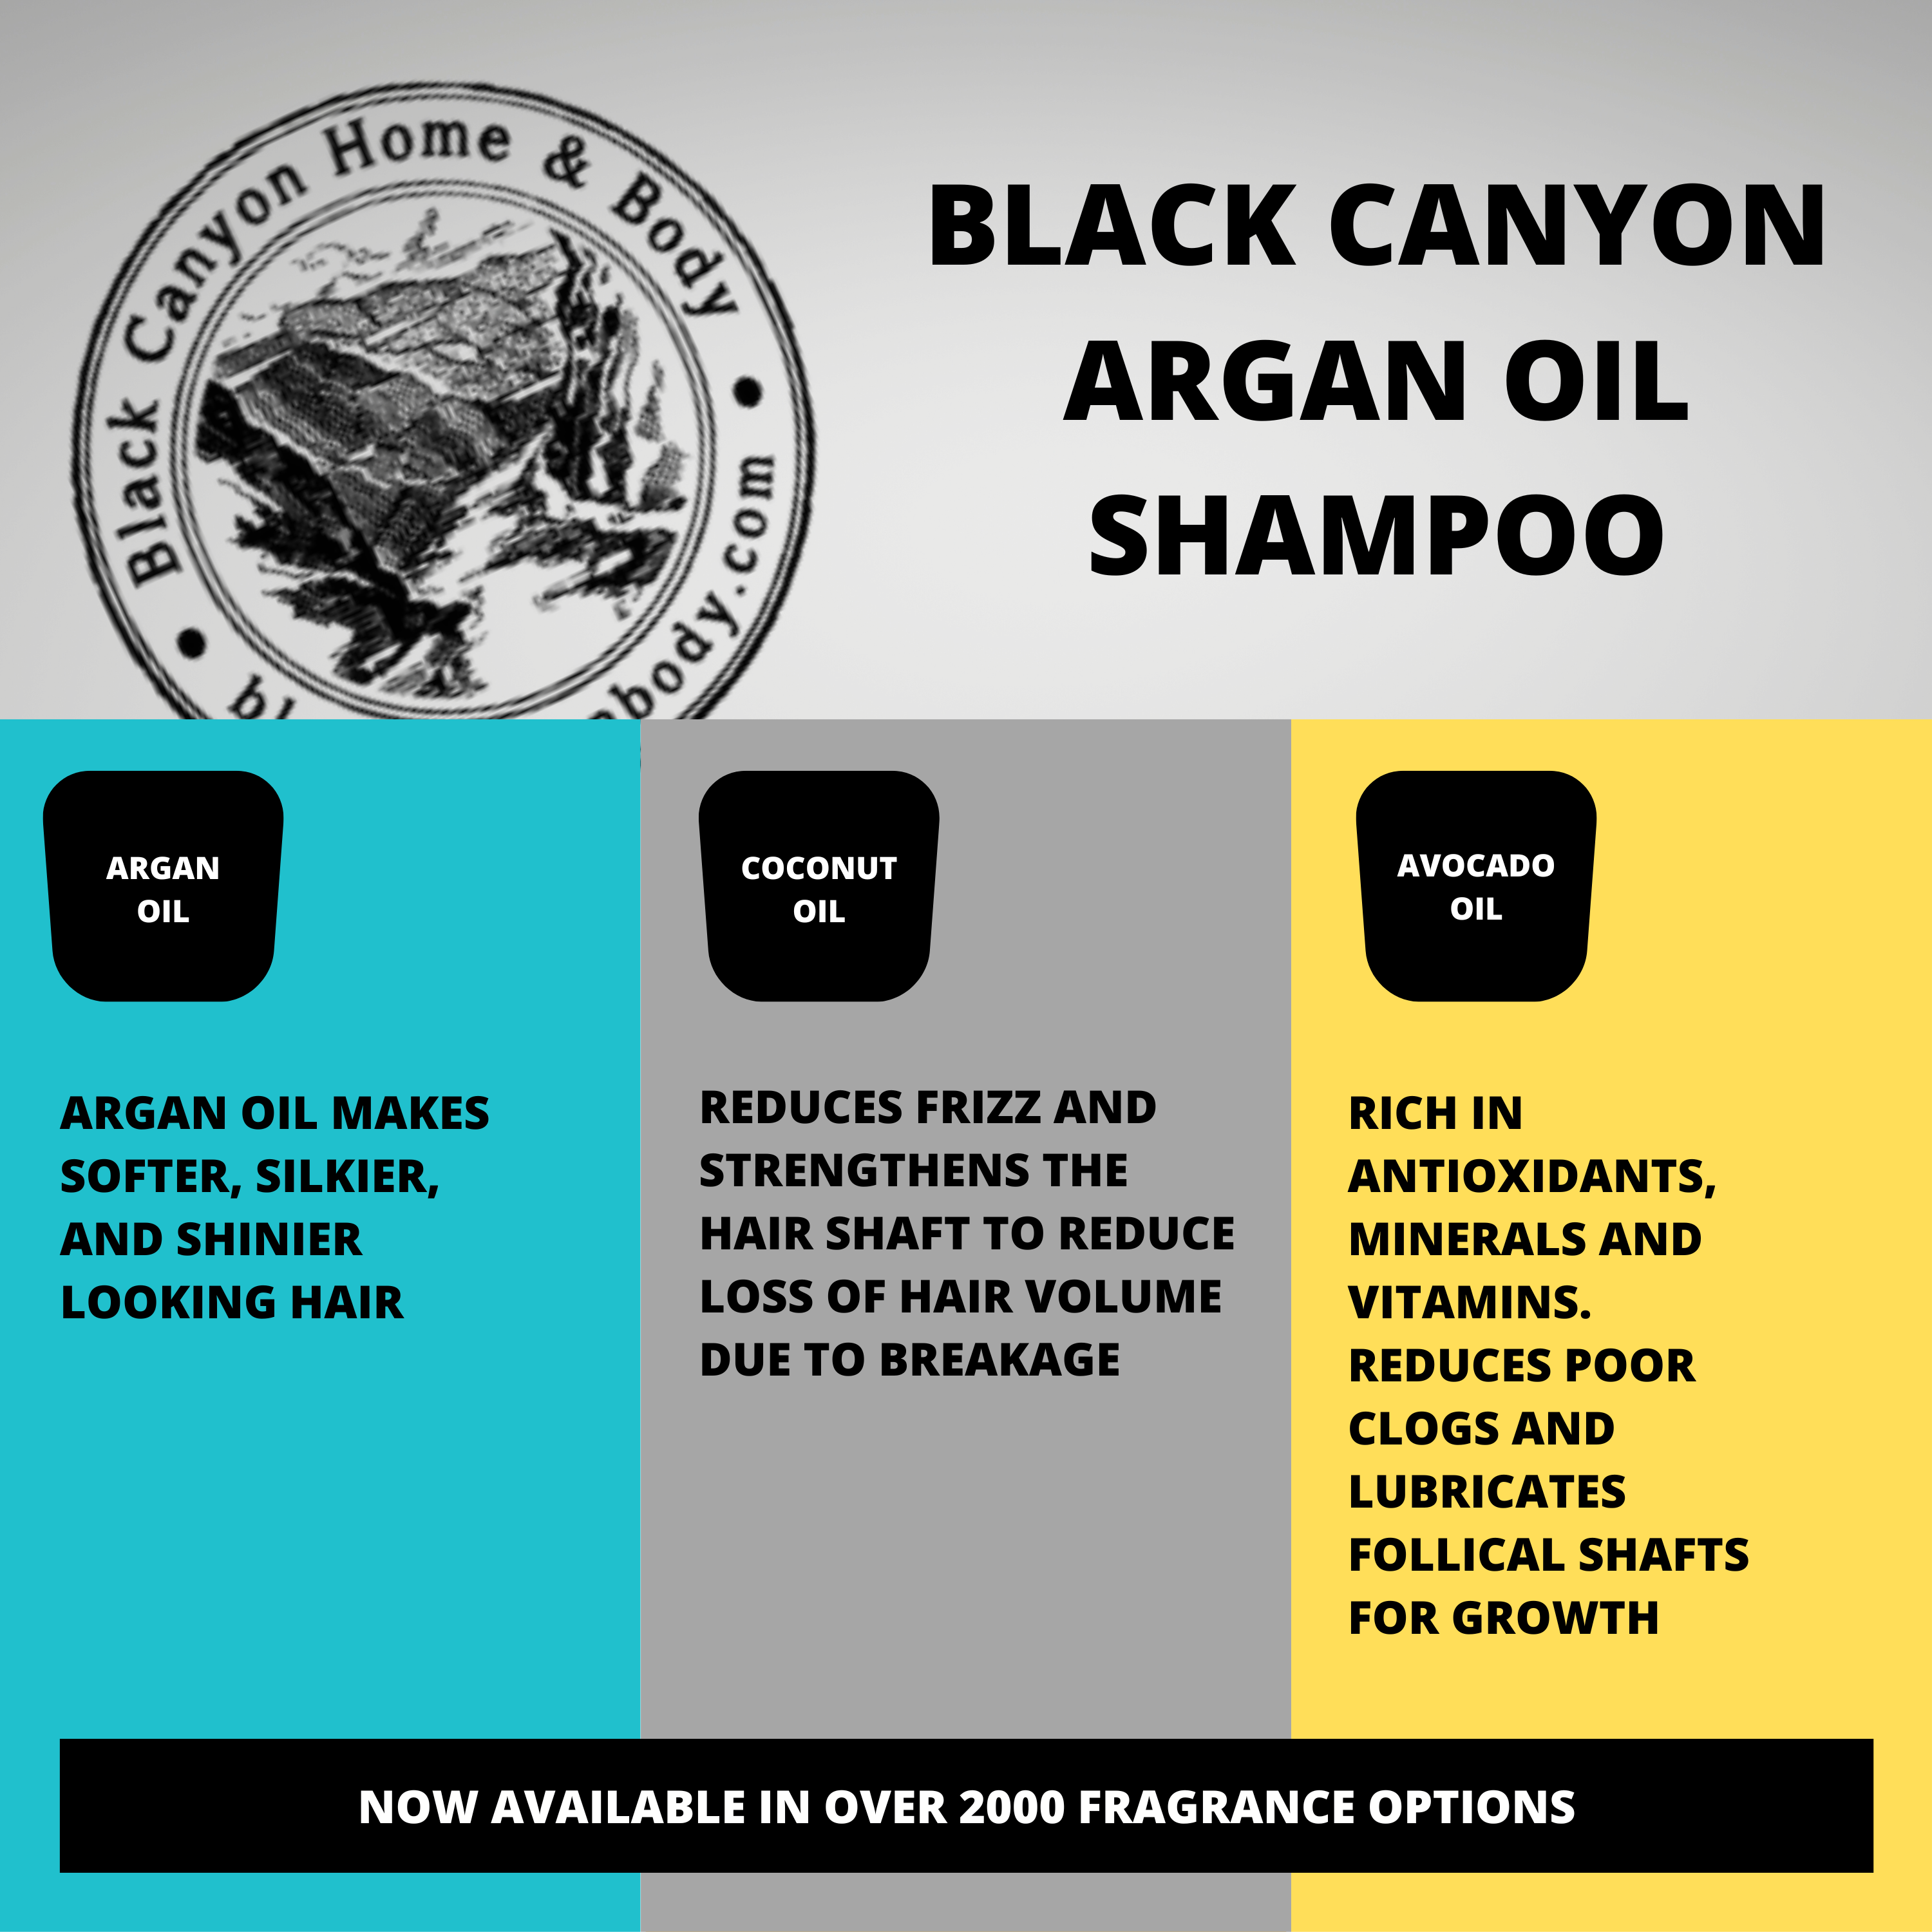 Black Canyon Black Apple Orchard Scented Shampoo with Argan Oil